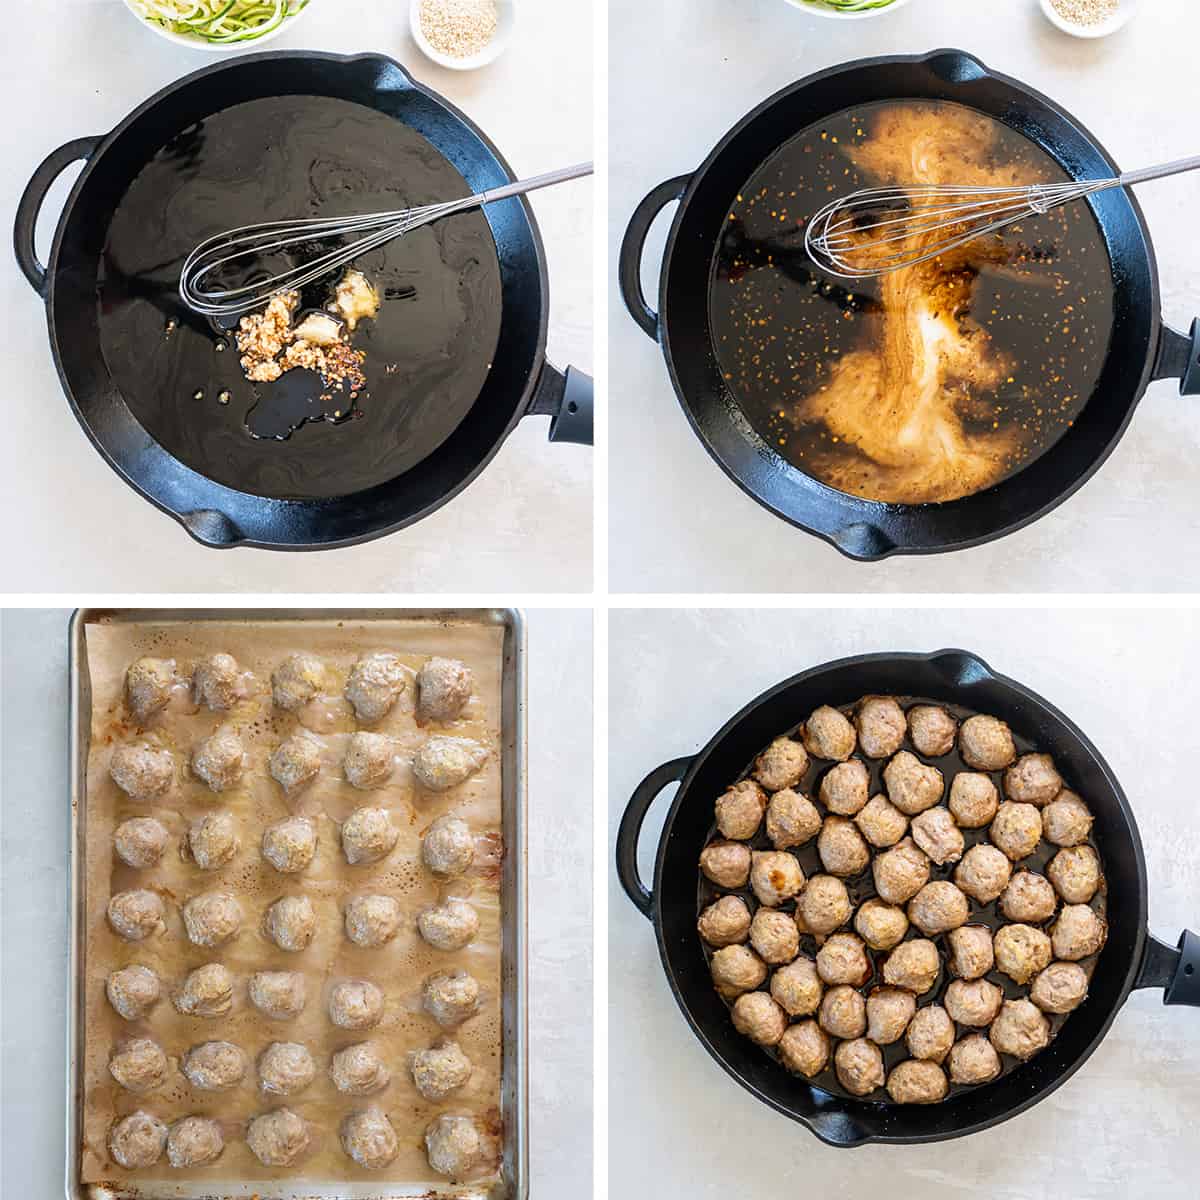 Four images of an Asian glaze being whisked in a cast iron skillet and baked meatballs are added.